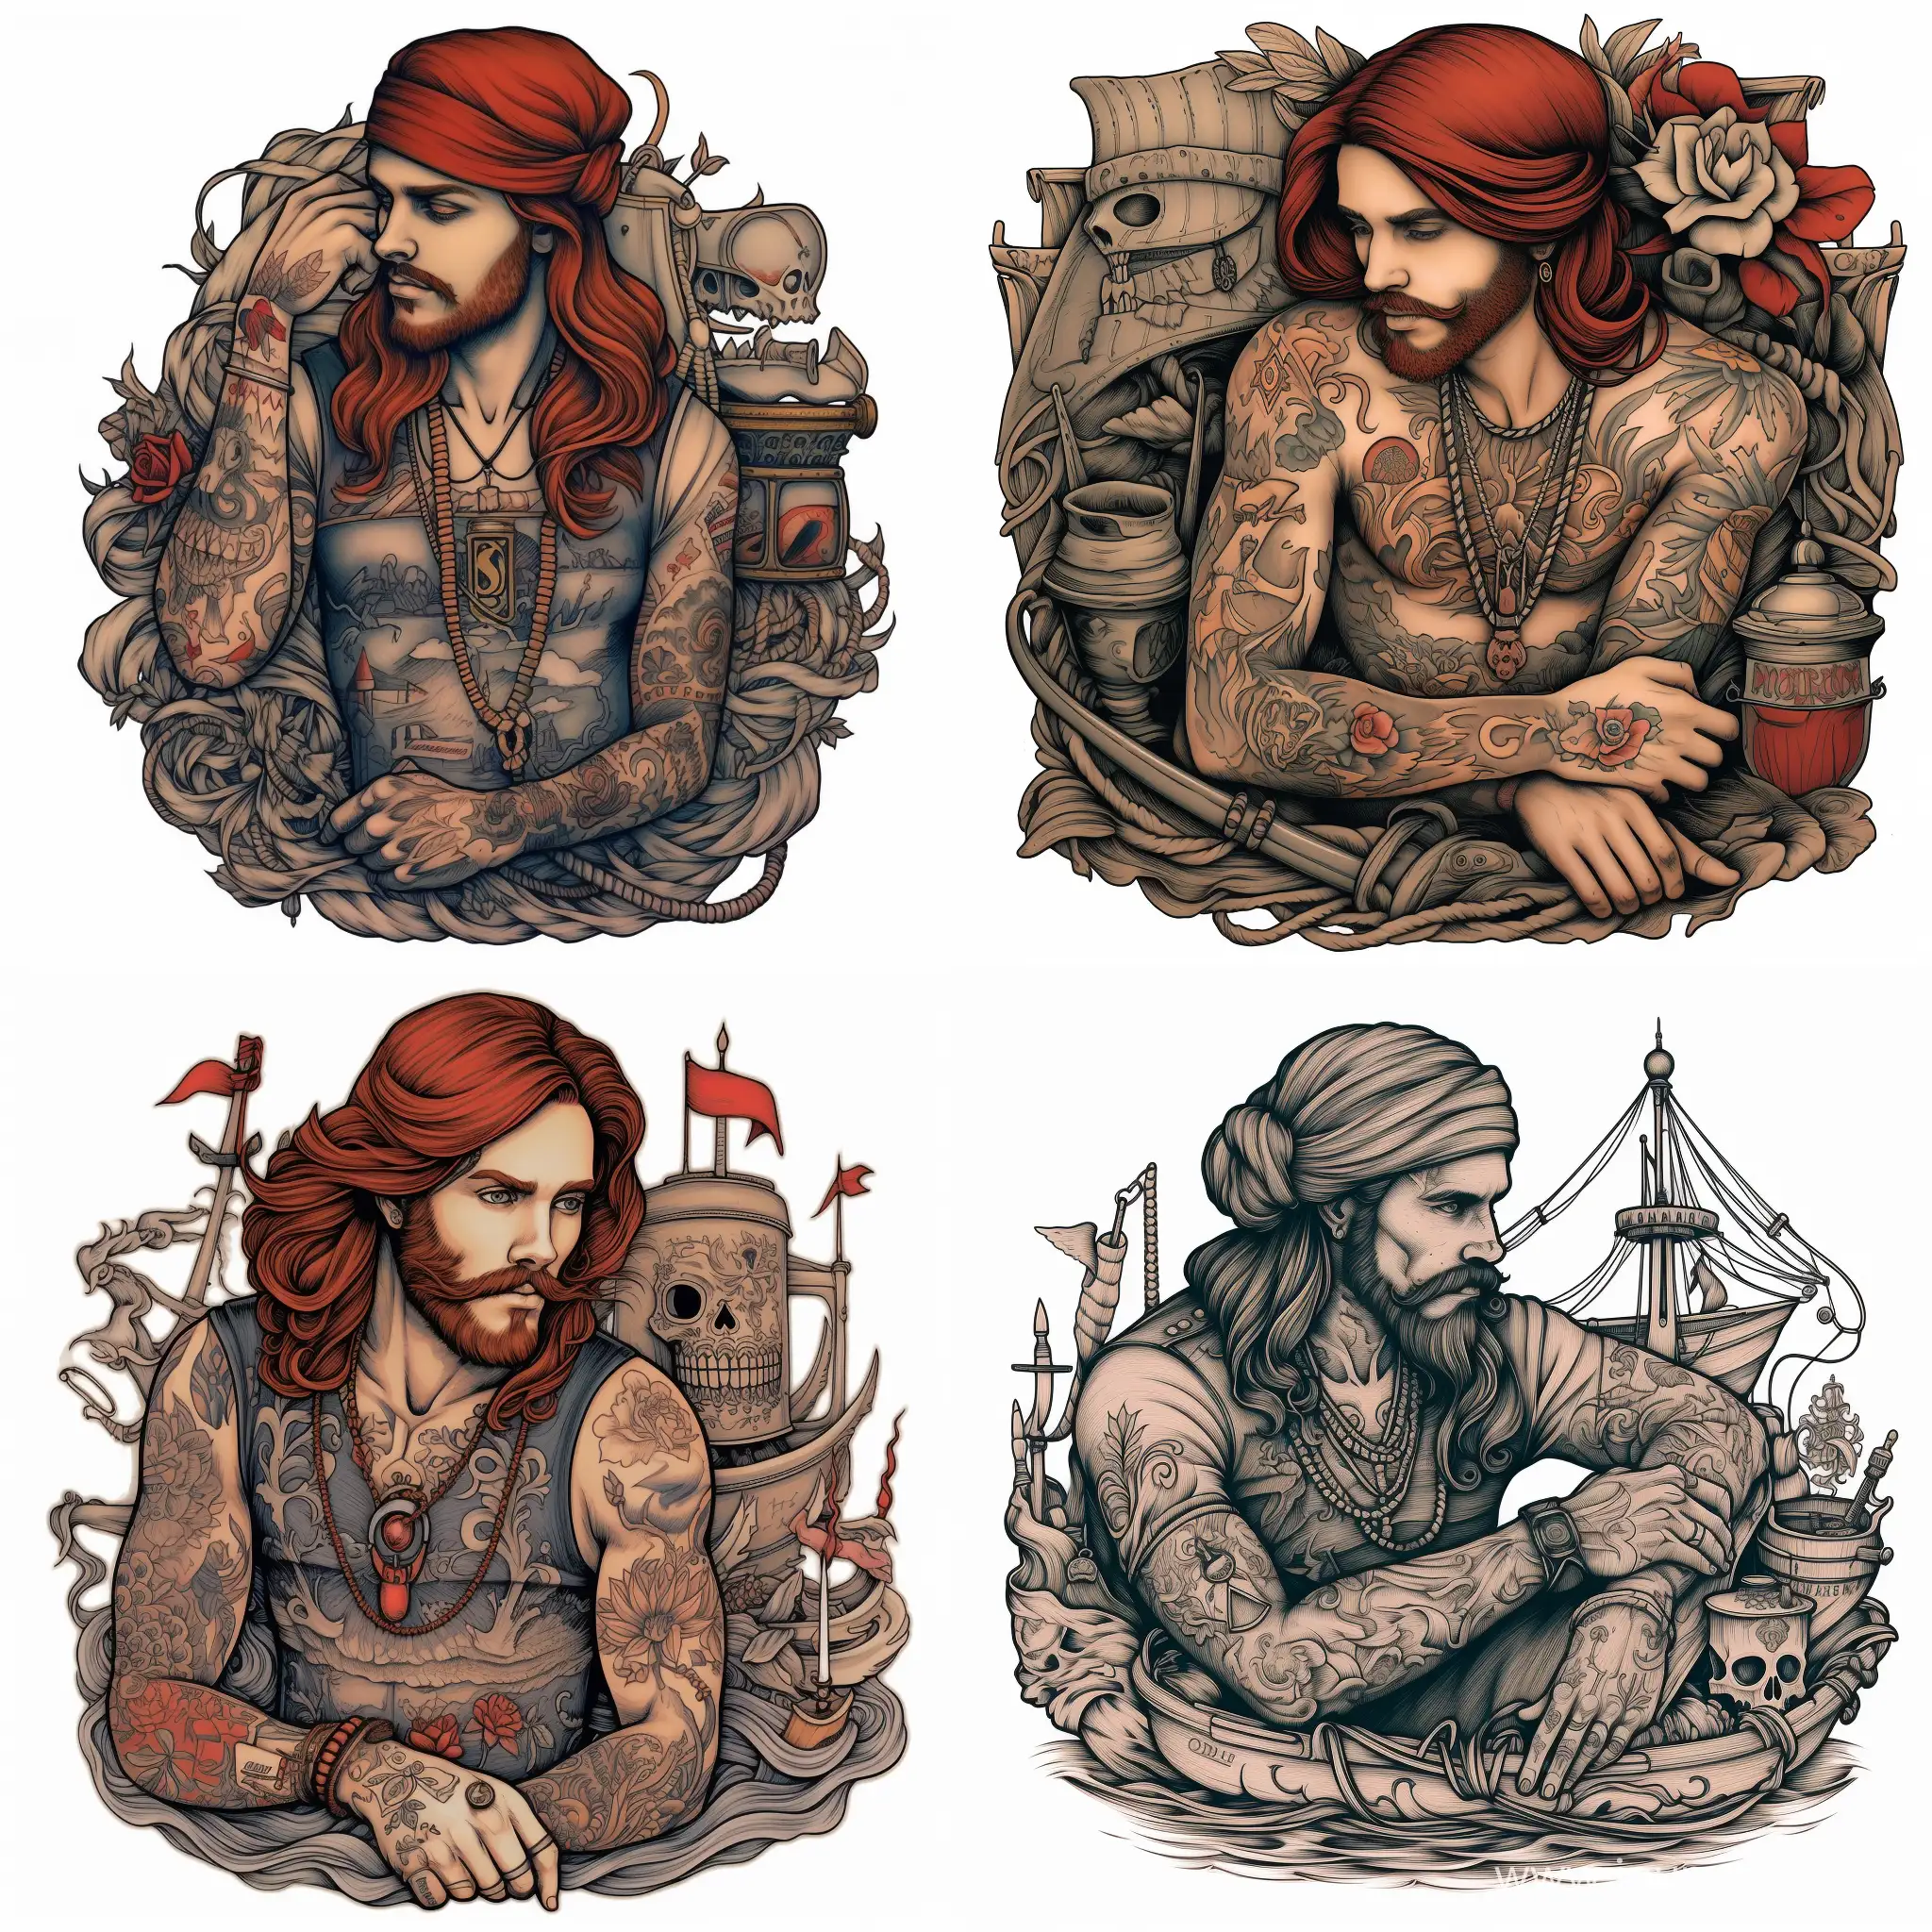 Adventurous-RedHaired-Pirate-with-Tattoos-in-a-11-Aspect-Ratio